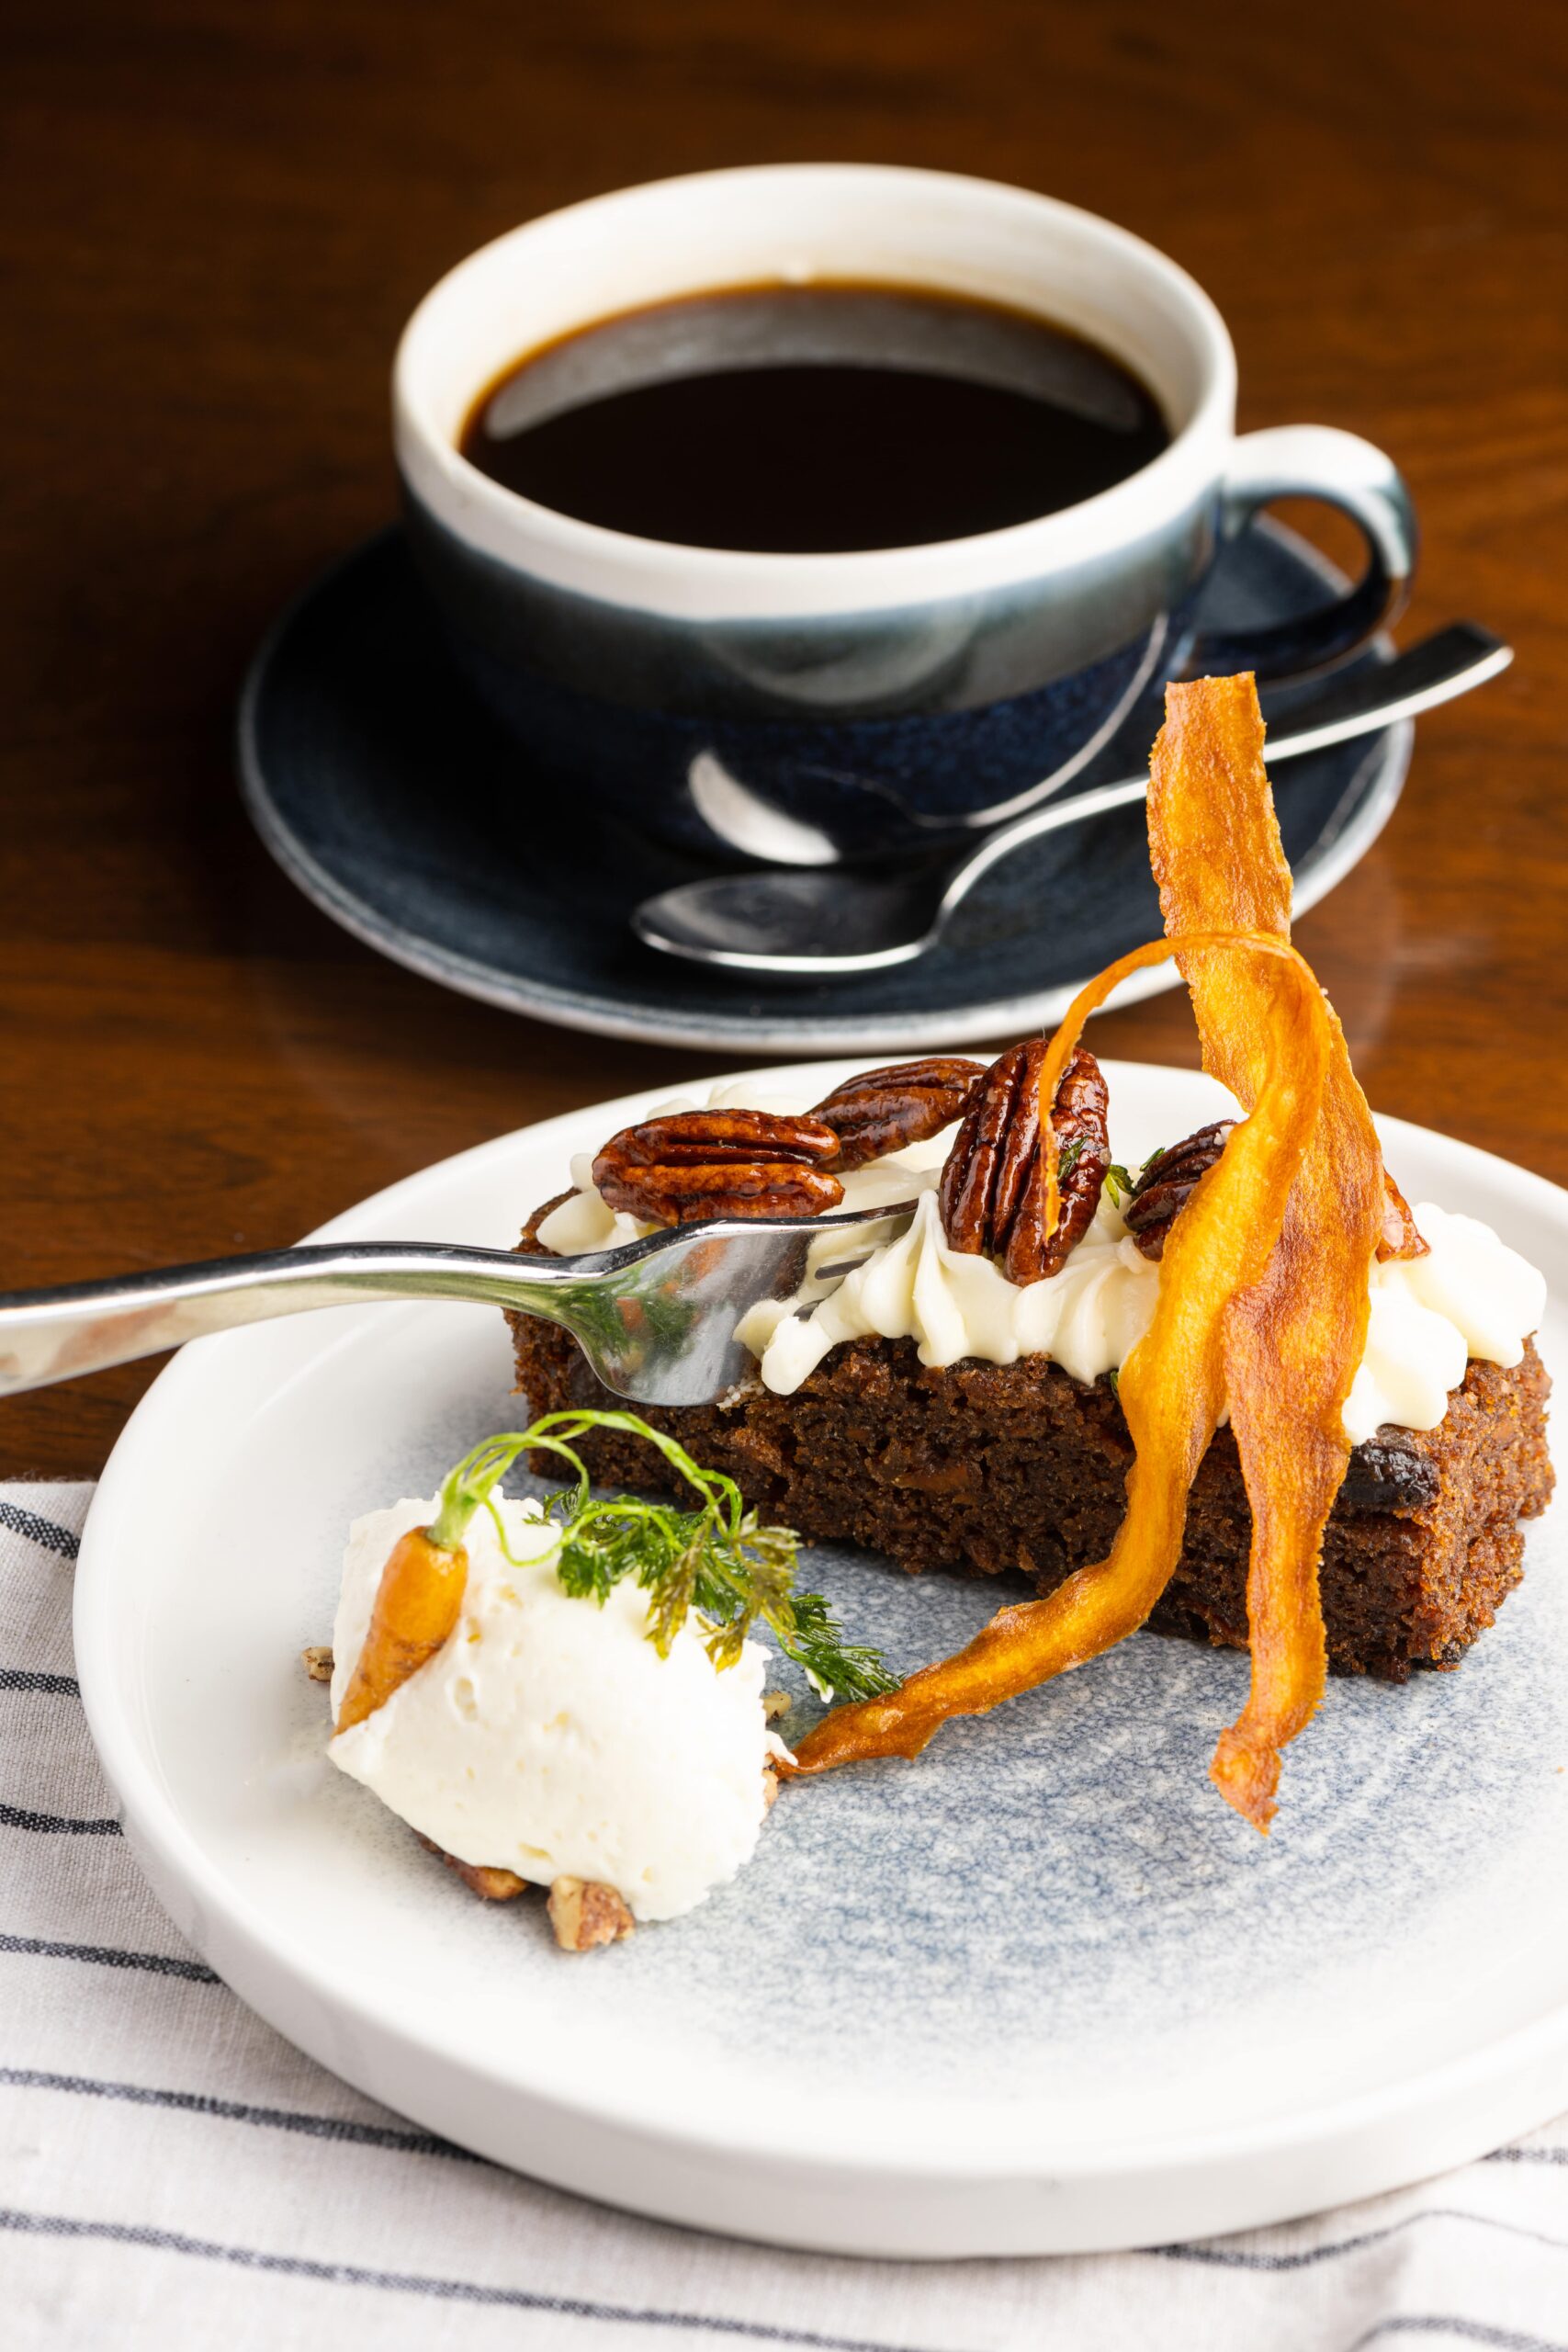 An image of carrot cake from Hotel Casa Del Mar's restaurant Terraza.